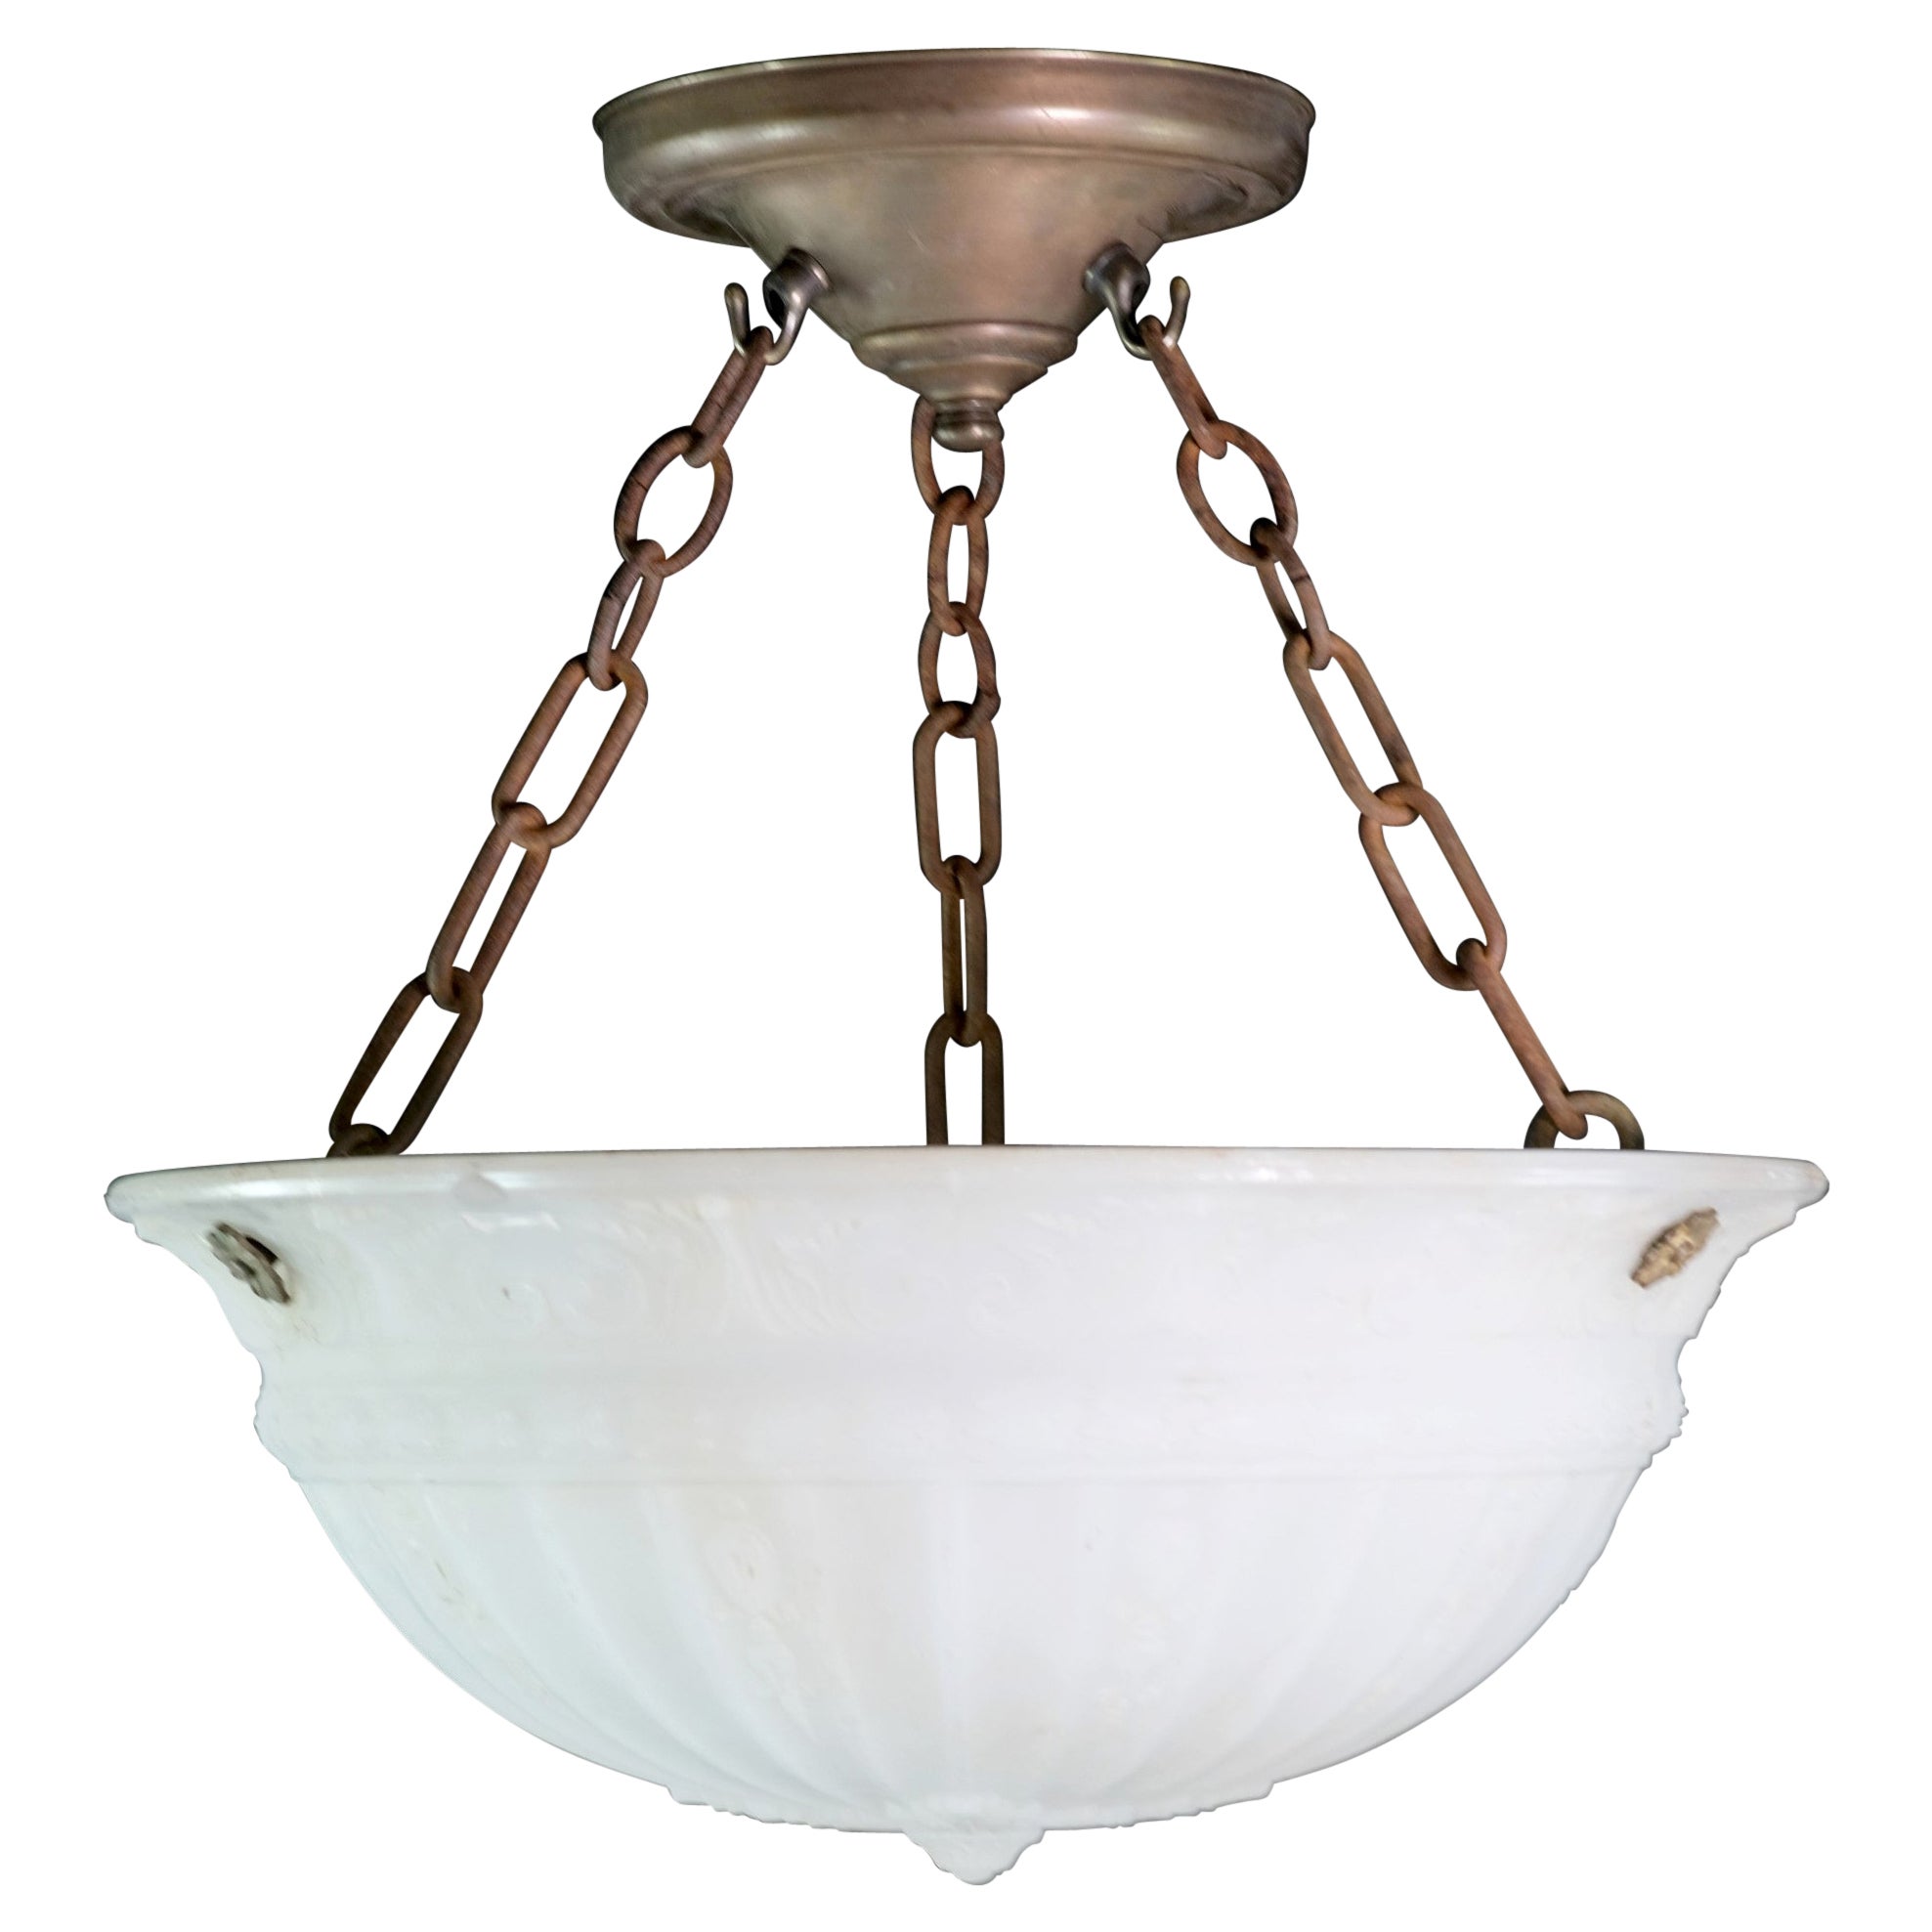 Antique Dish Pendant Light Fluted Cast Glass Brass Hardware and Chain Small Qty